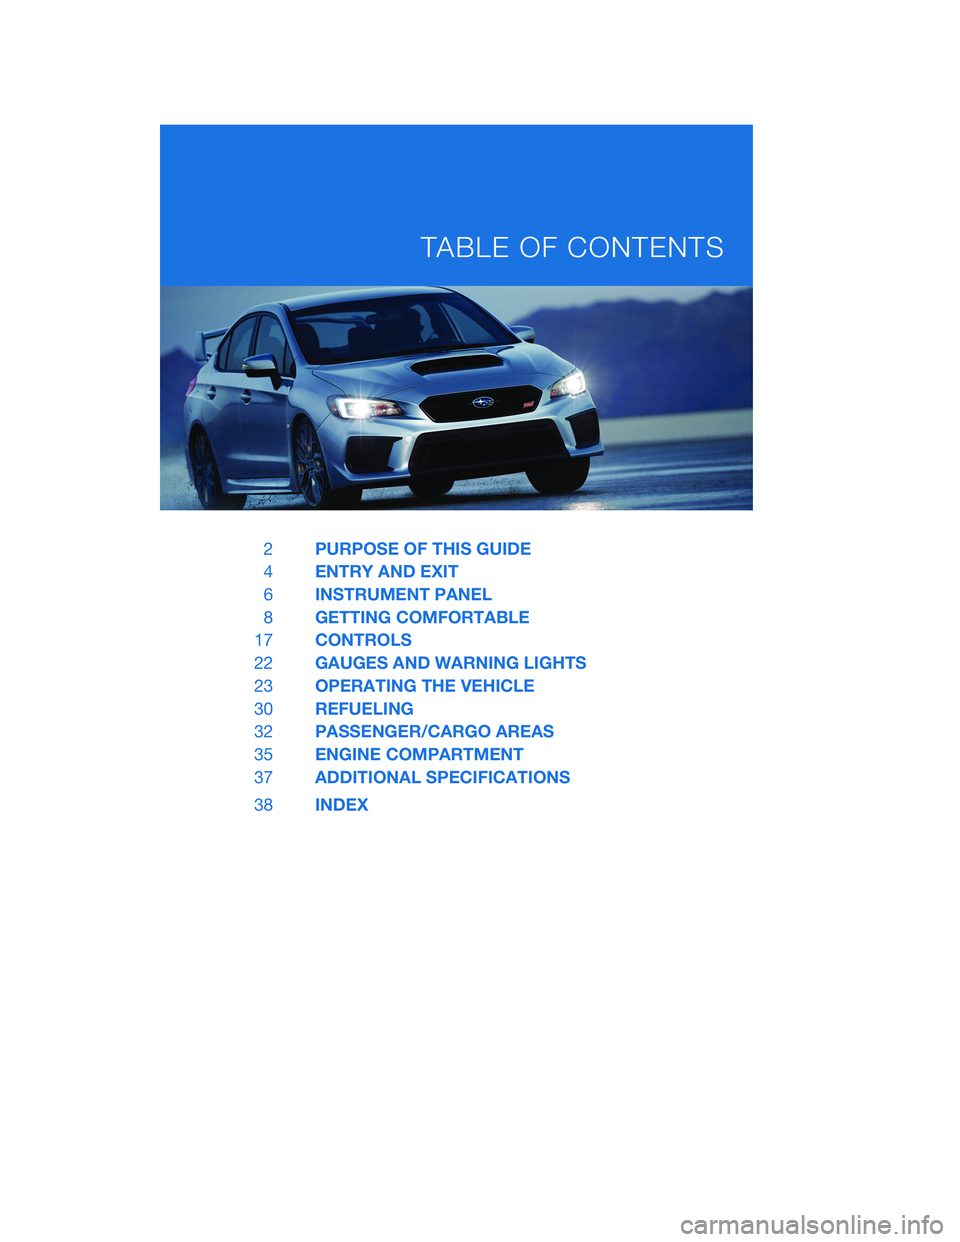 SUBARU WRX 2020  Quick Guide 2PURPOSE OF THIS GUIDE
4ENTRY AND EXIT
6INSTRUMENT PANEL
8GETTING COMFORTABLE
17CONTROLS
22GAUGES AND WARNING LIGHTS
23OPERATING THE VEHICLE
30REFUELING
32PASSENGER/CARGO AREAS
35ENGINE COMPARTMENT
37